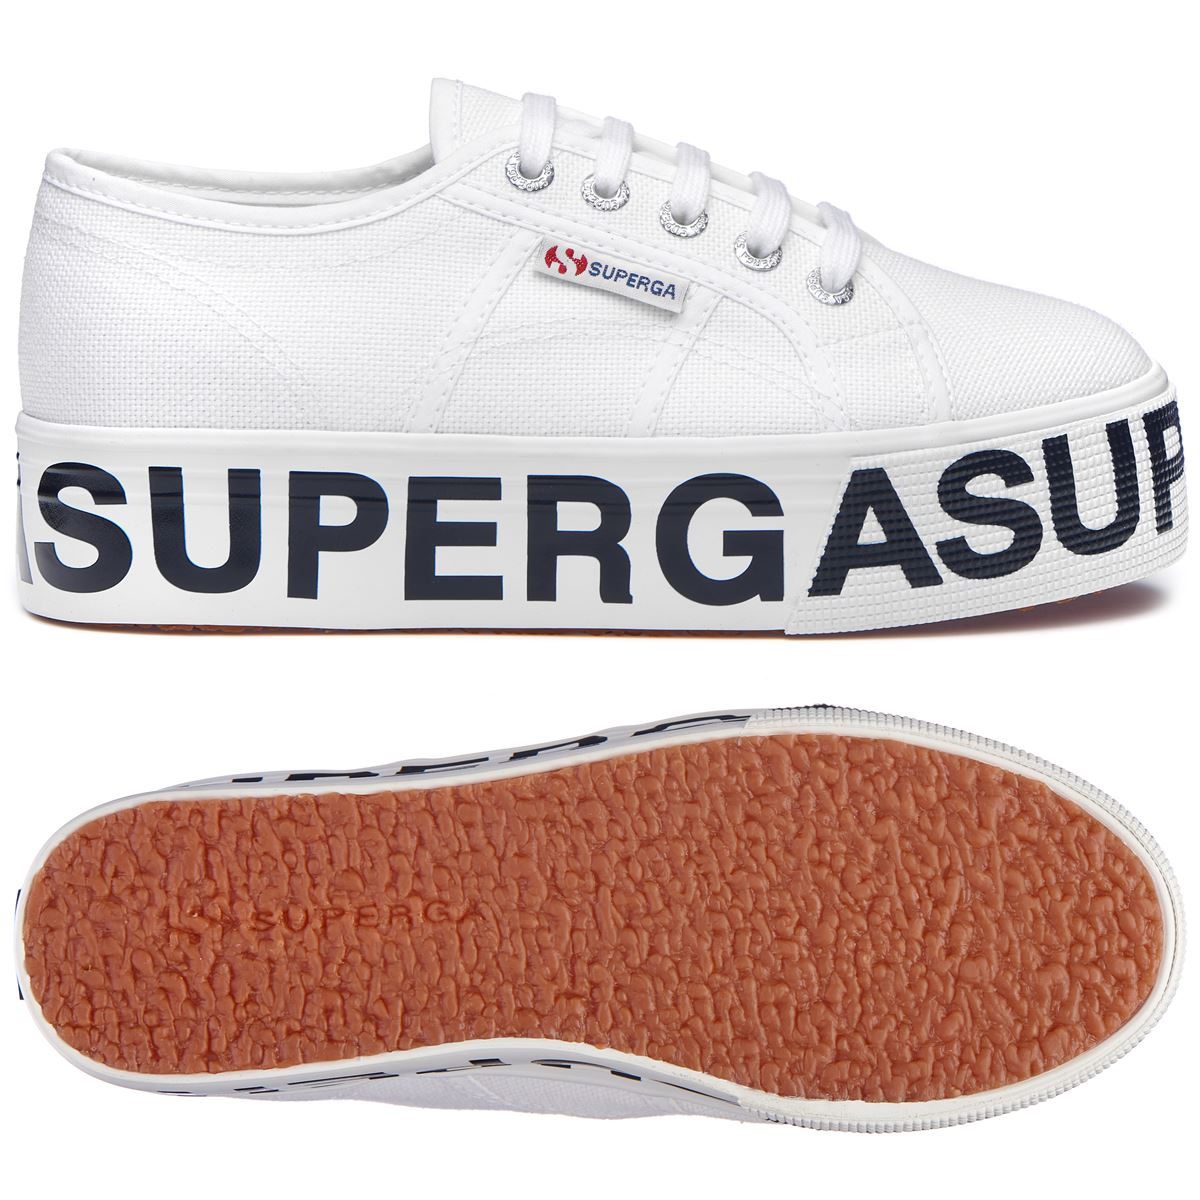 Superga sneakers cotw outsole lettering